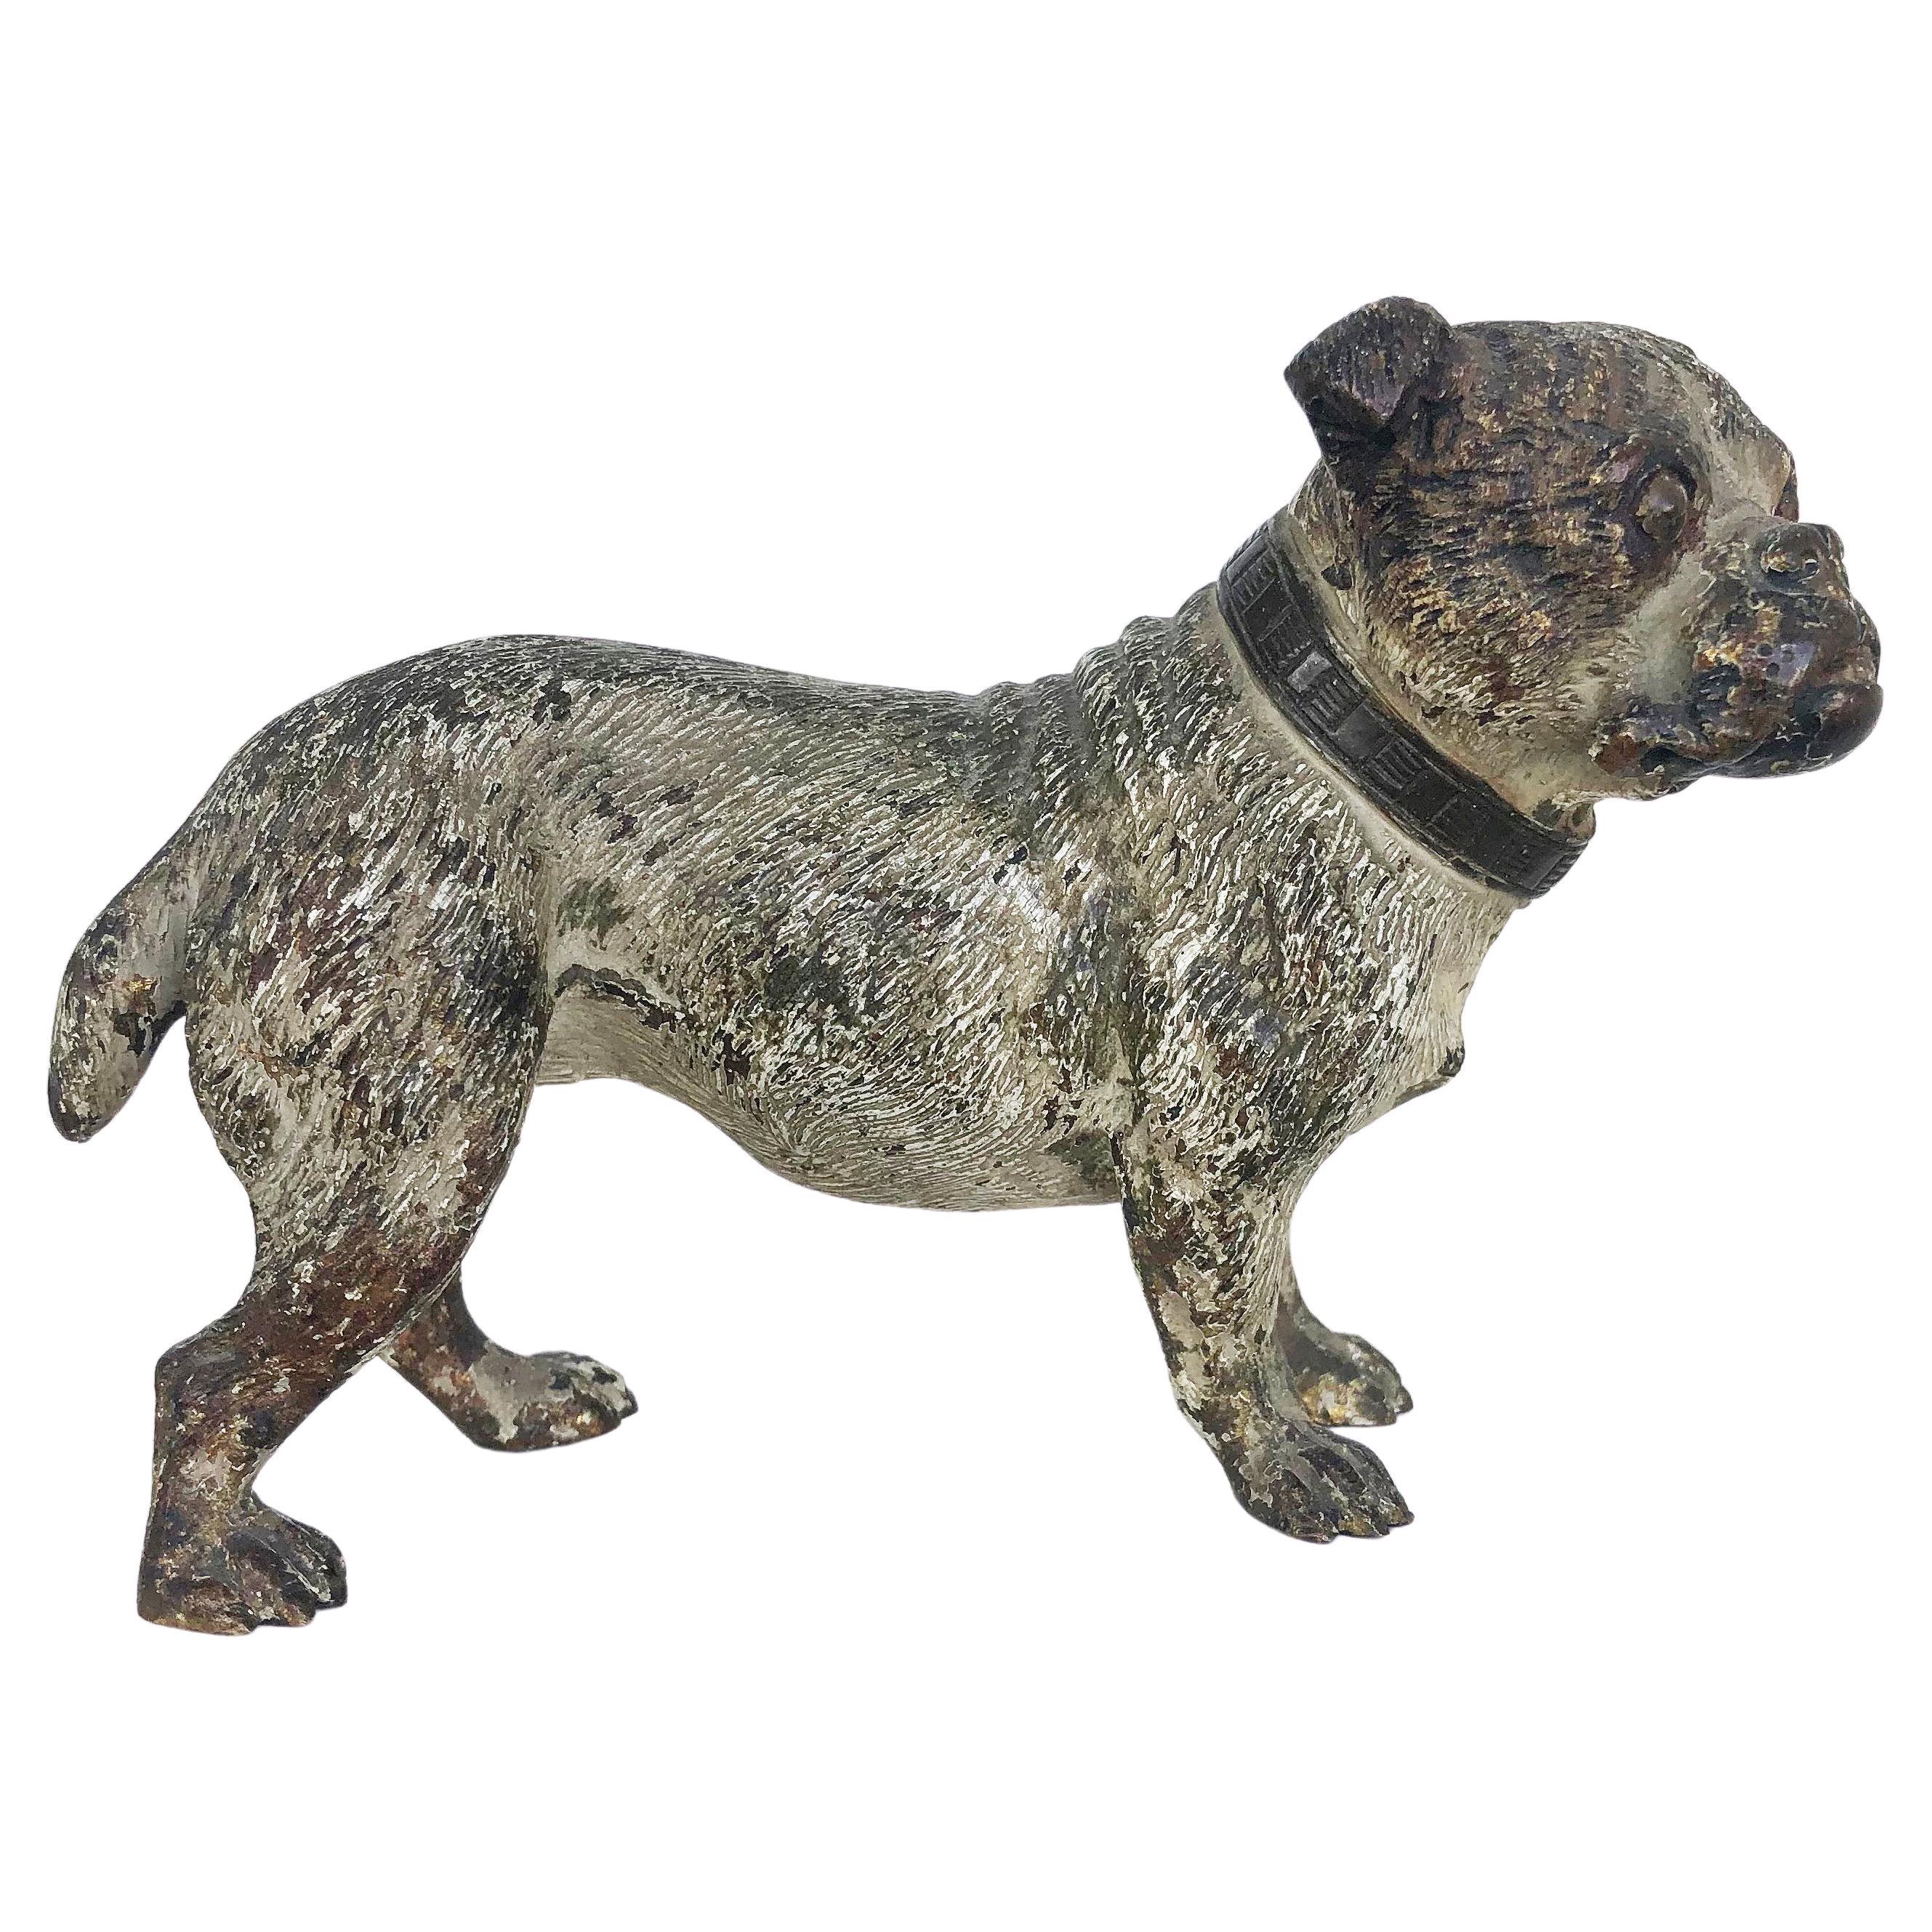 Vienna cold painted bronze bulldog, antique dog figure

Offered is a Viennese cold-painted bronze figure of a bulldog dating to the early 20th century. He shows an antique patina with expected losses to the original paint.